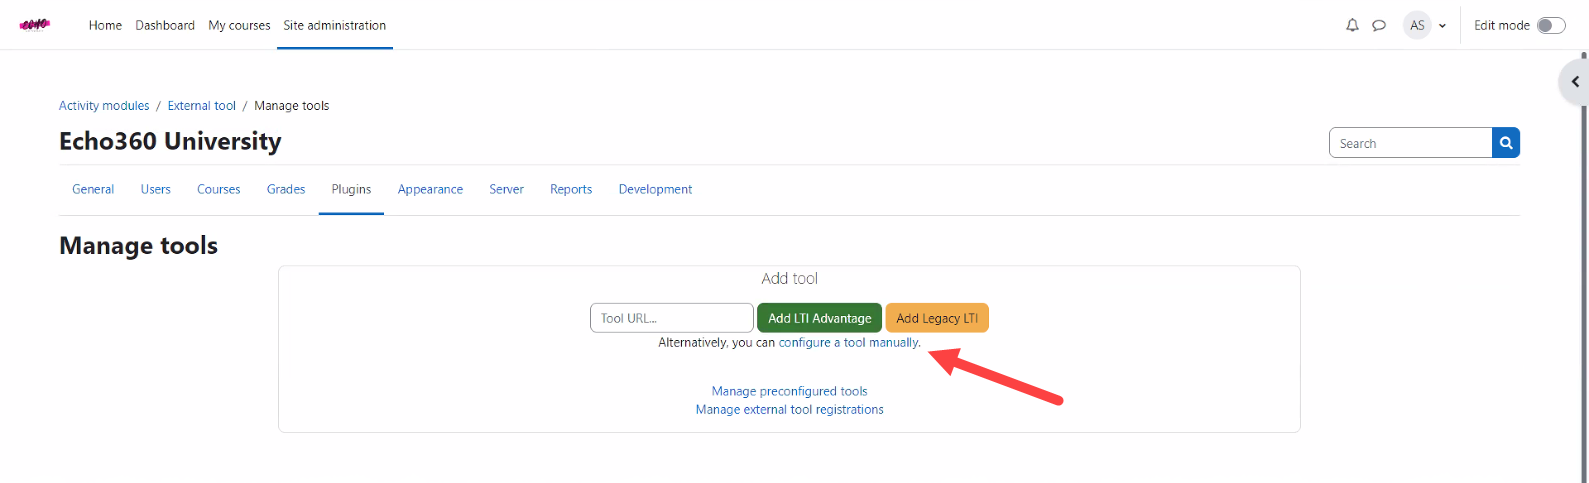 Moodle Manage tools with configure a tool manually link identified as described